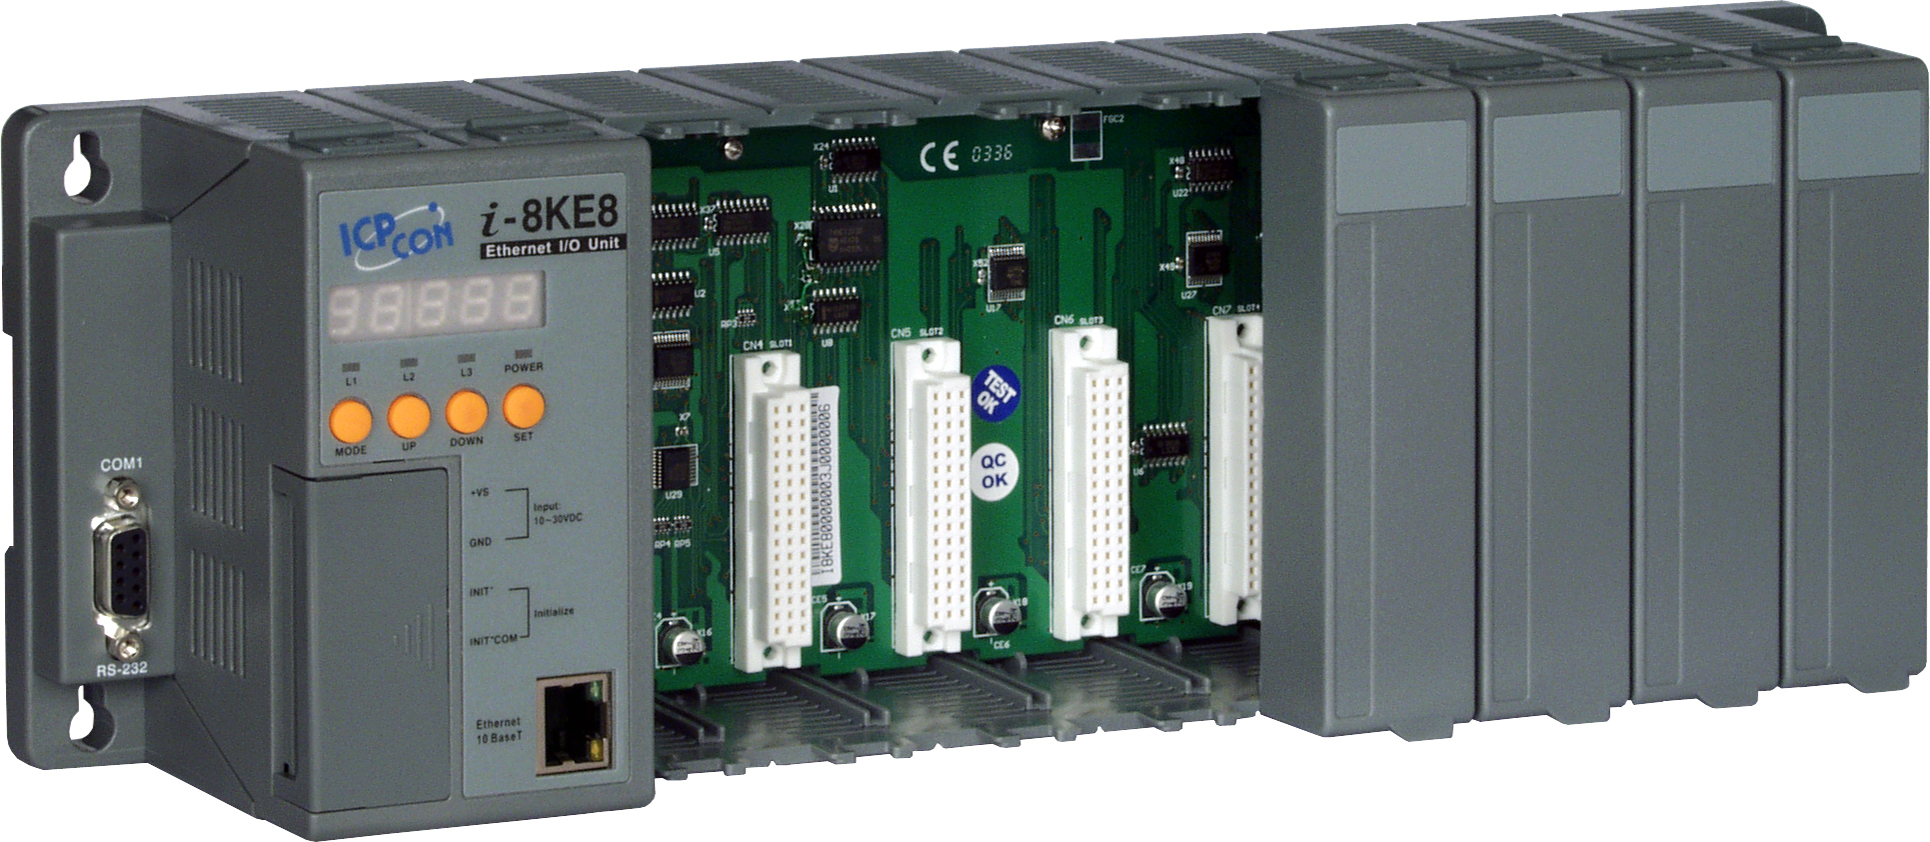 I-8KE8-G-CRCR-Automation-Controller buy online at ICPDAS-EUROPE